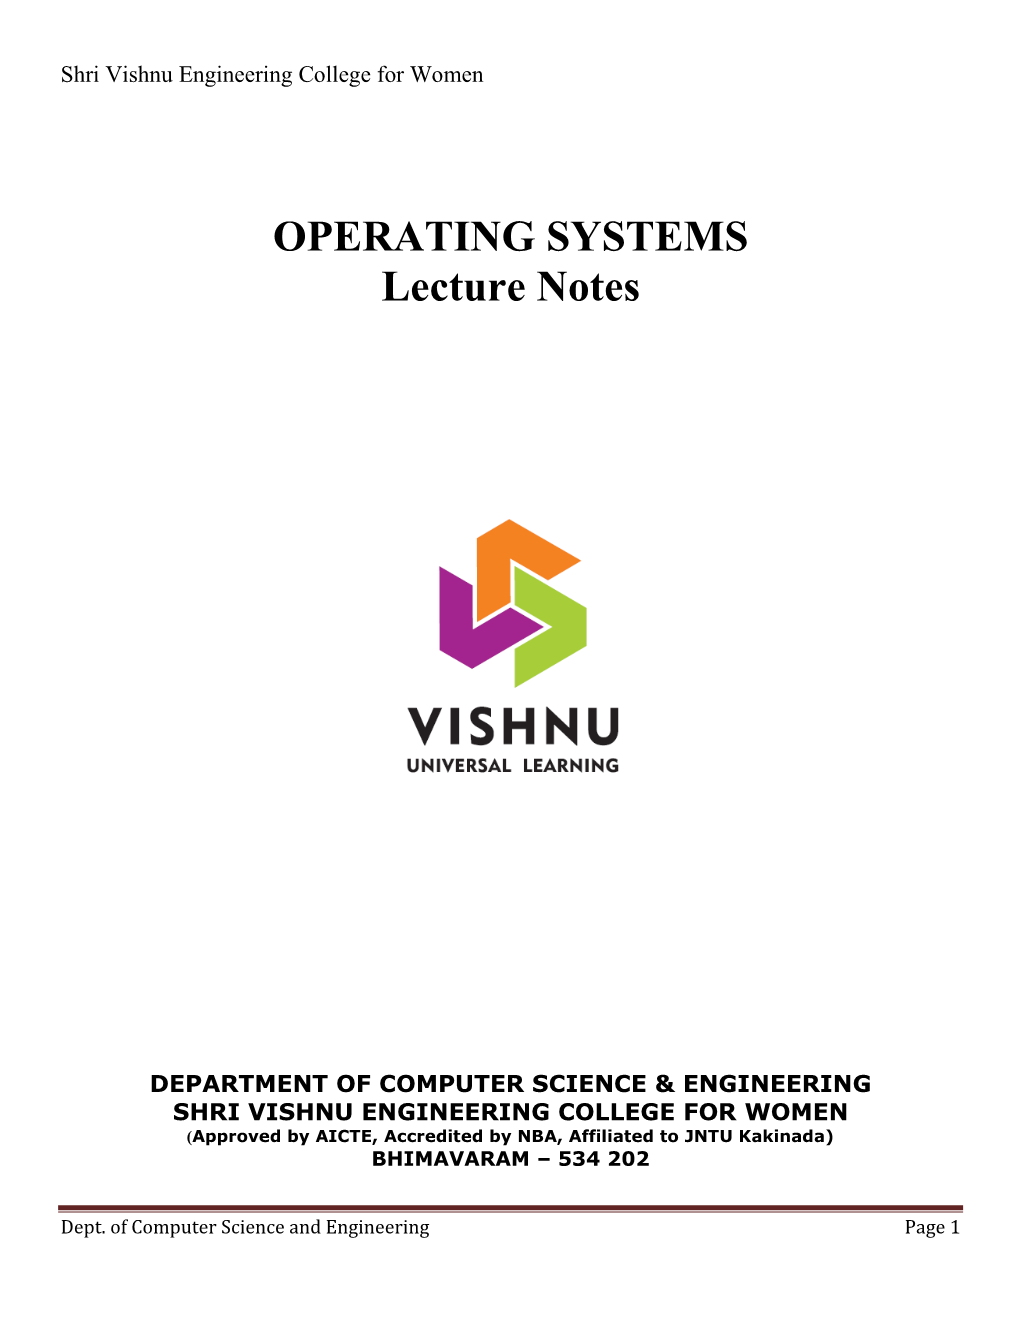 OPERATING SYSTEMS Lecture Notes